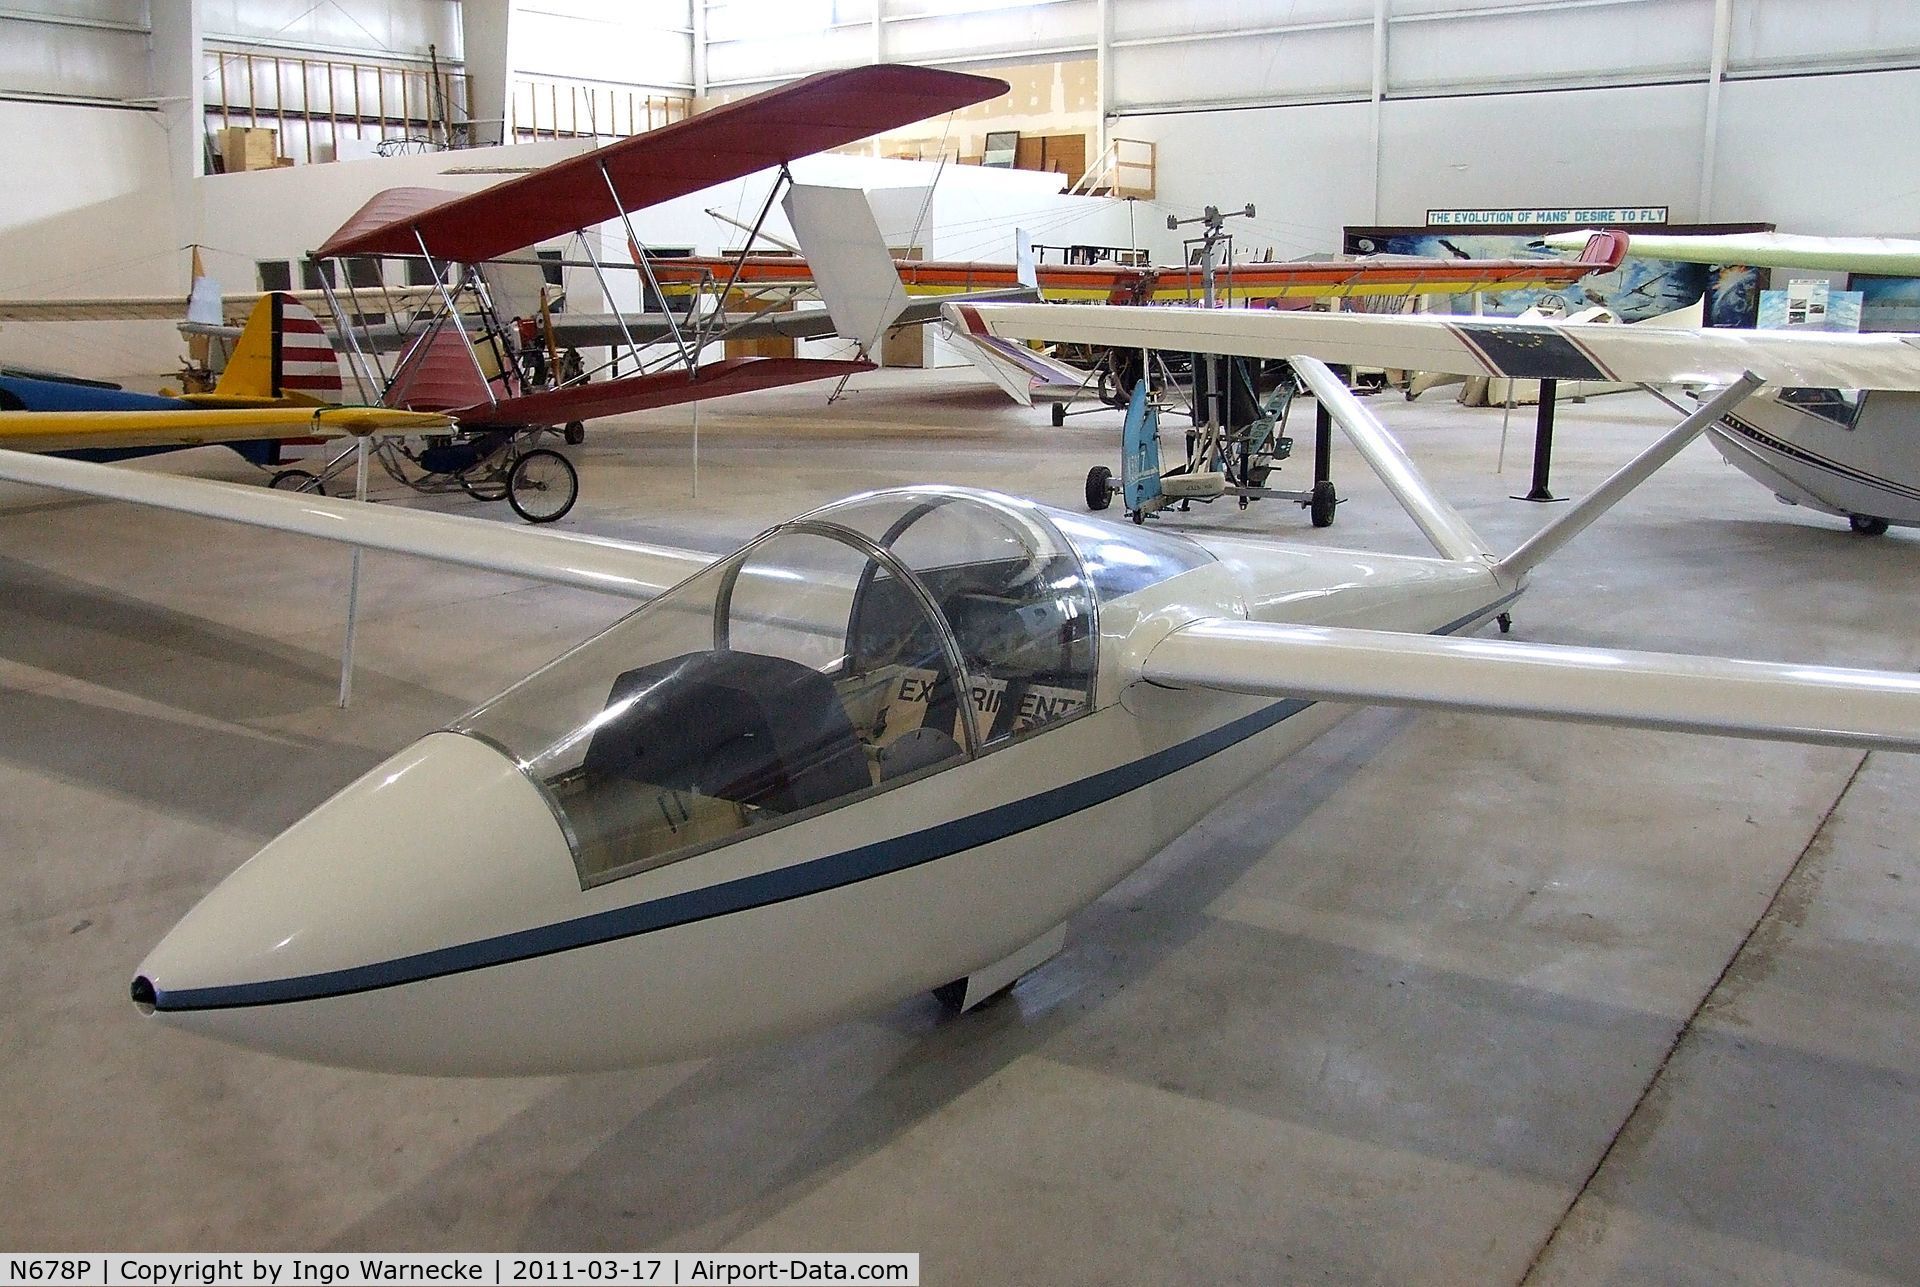 N678P, 1974 Schreder HP-11A C/N 36, Schreder HP-11A at the Southwest Soaring Museum, Moriarty NM